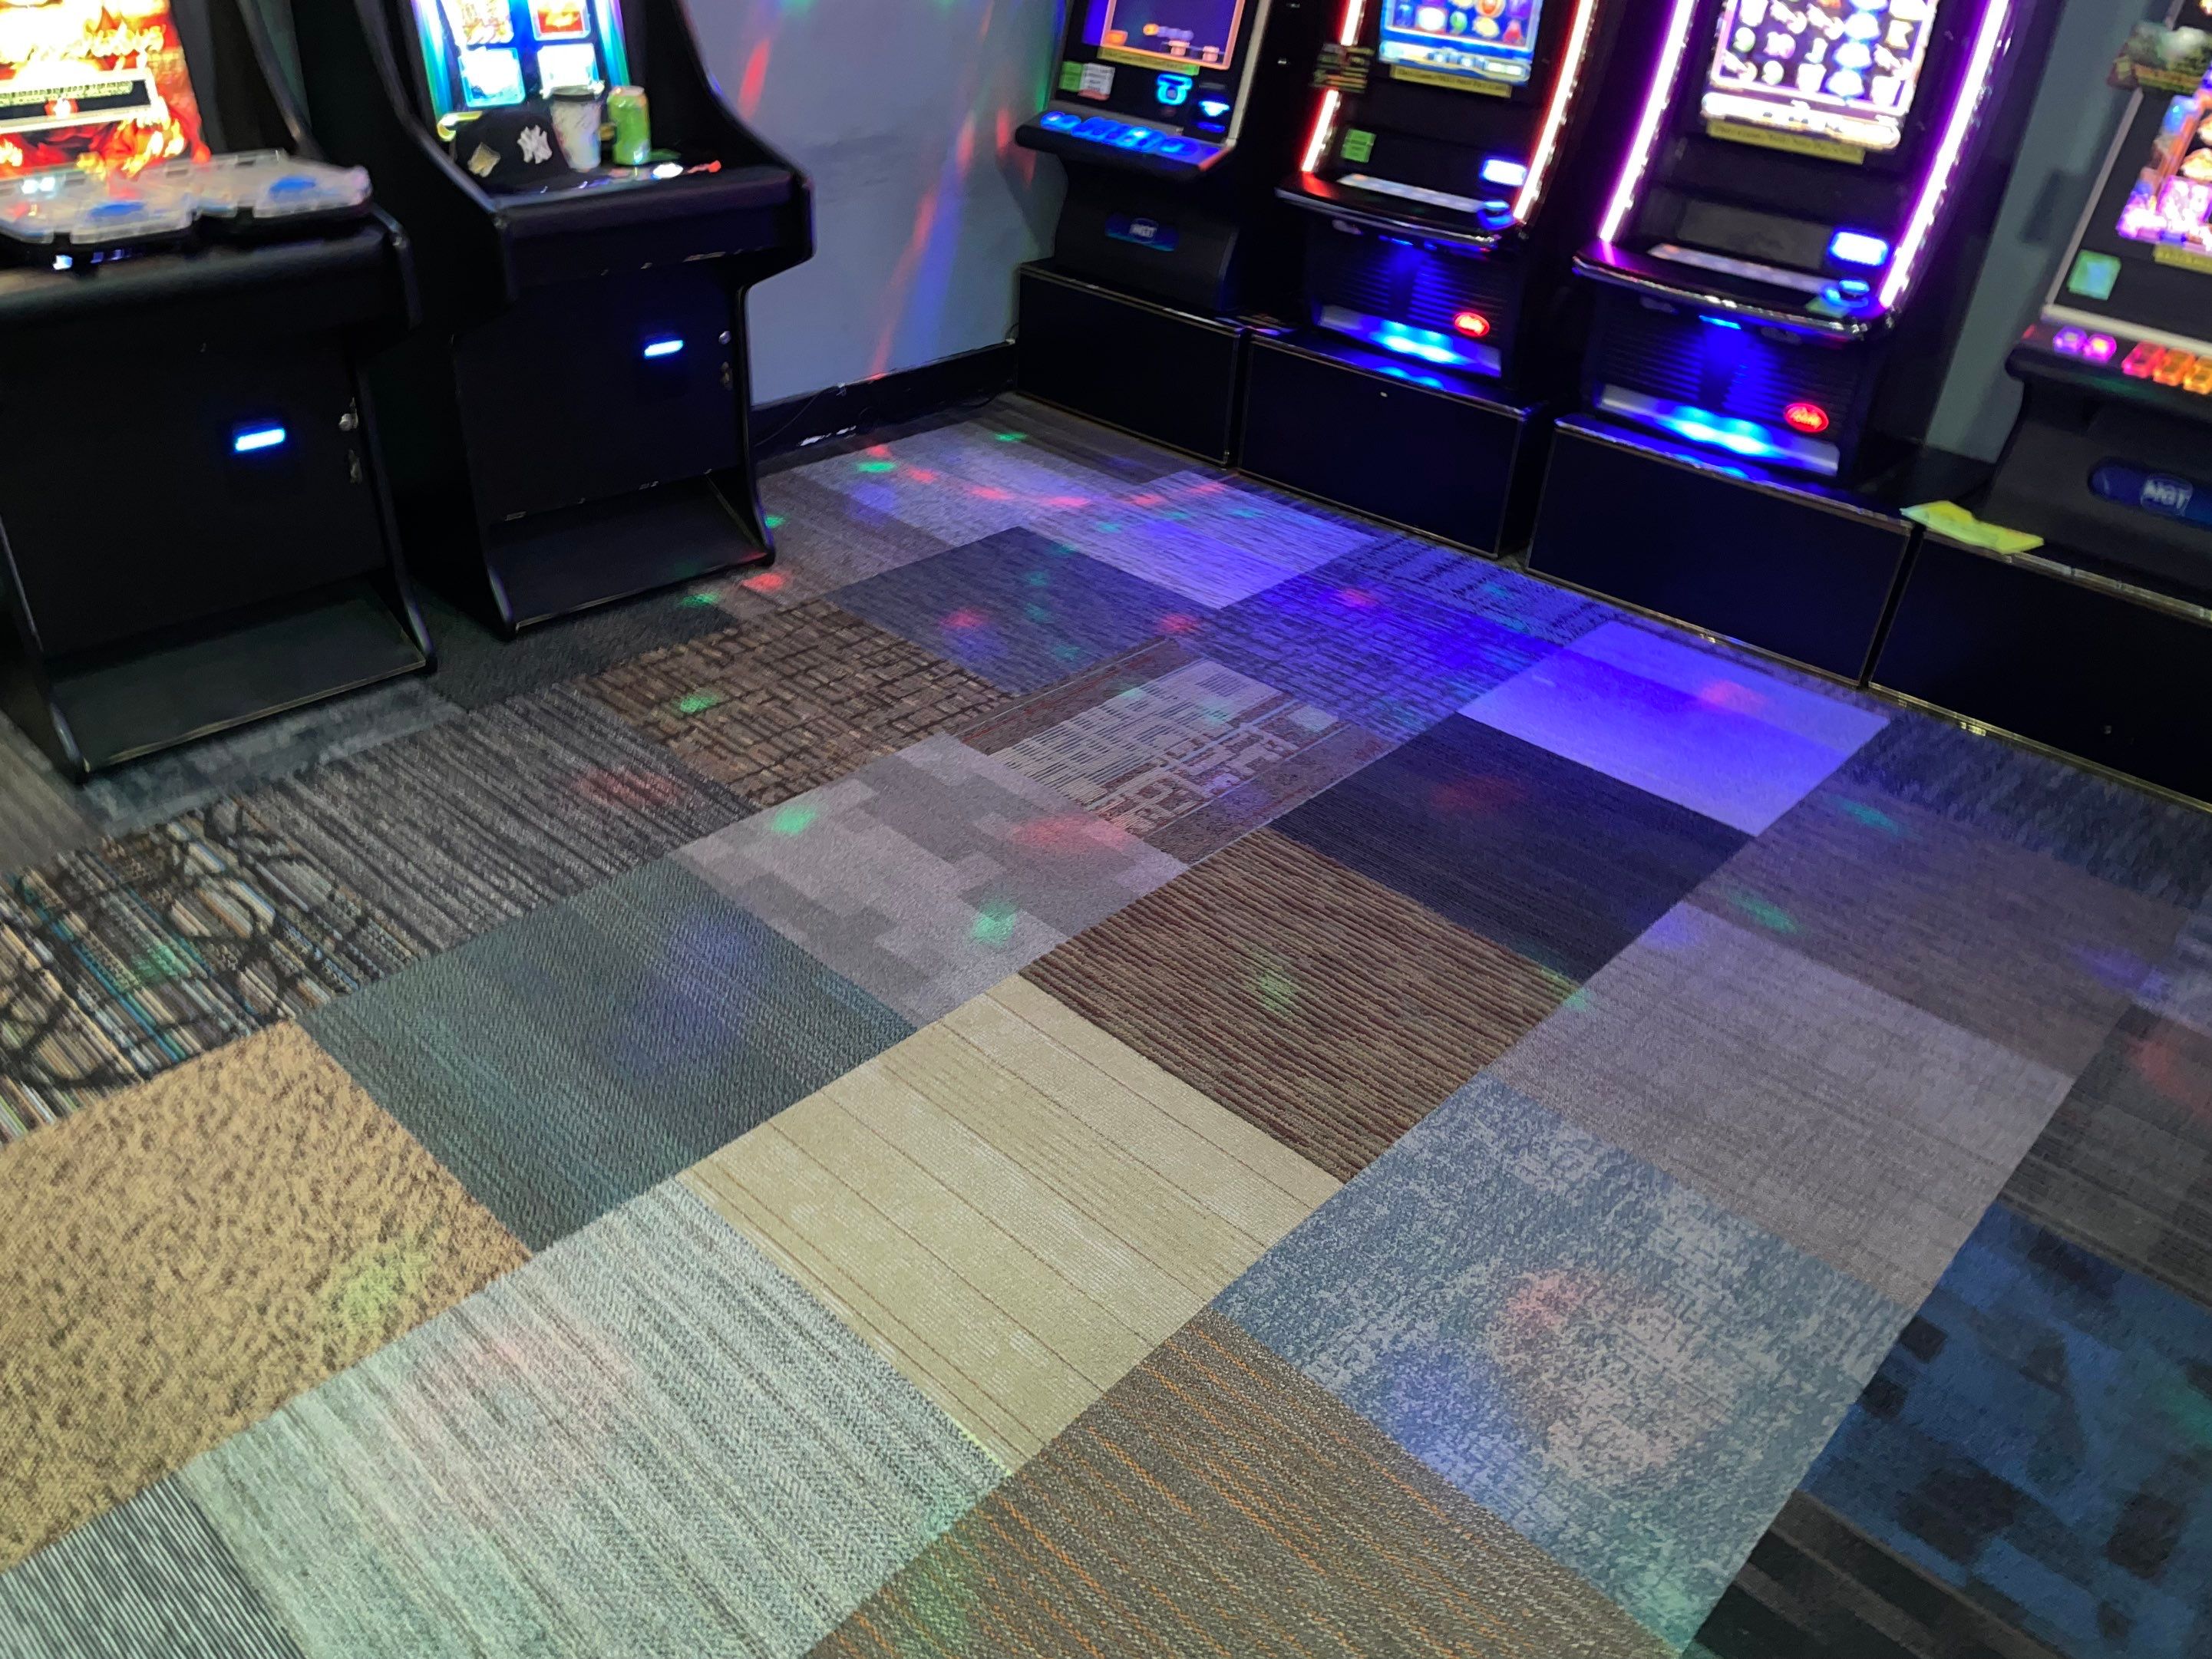 commercial carpet cleaning at arcade gaming area